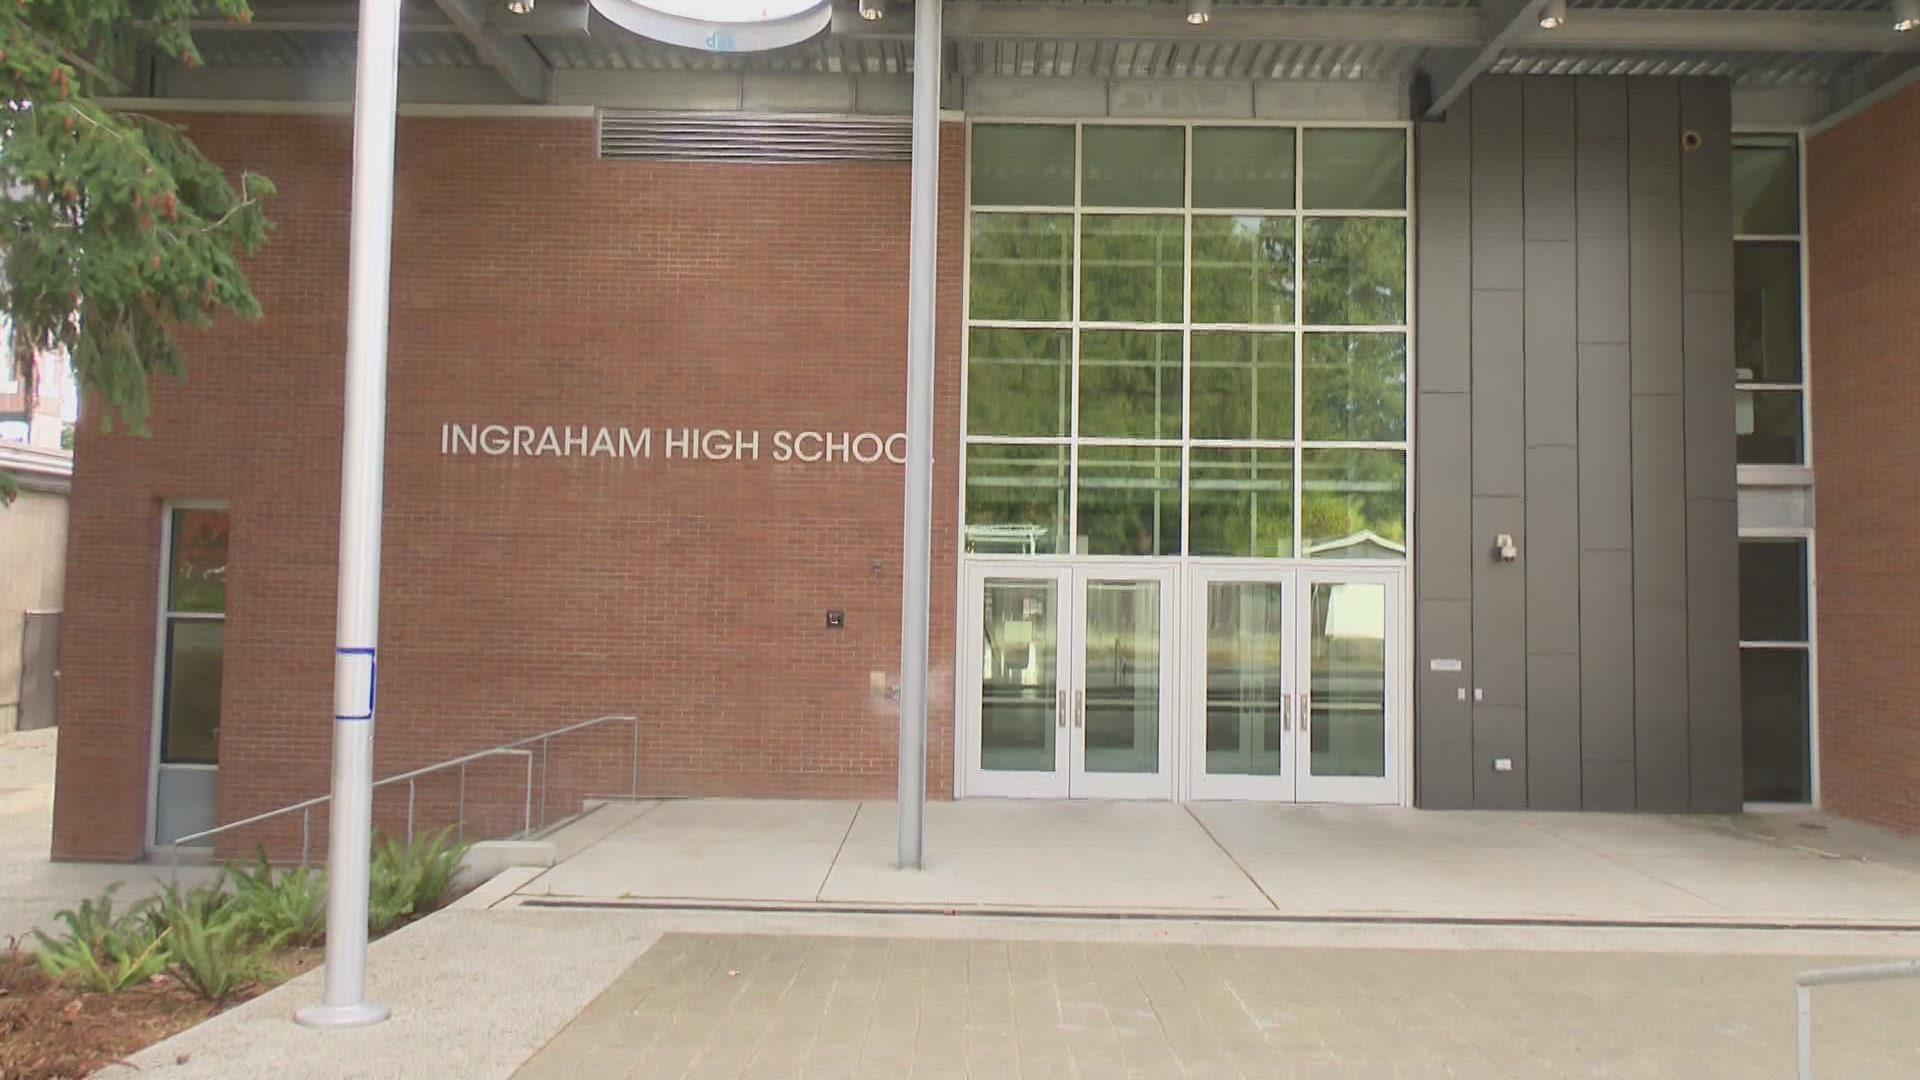 The initiative comes in response to the recent deadly shooting and protests at Ingraham High School.